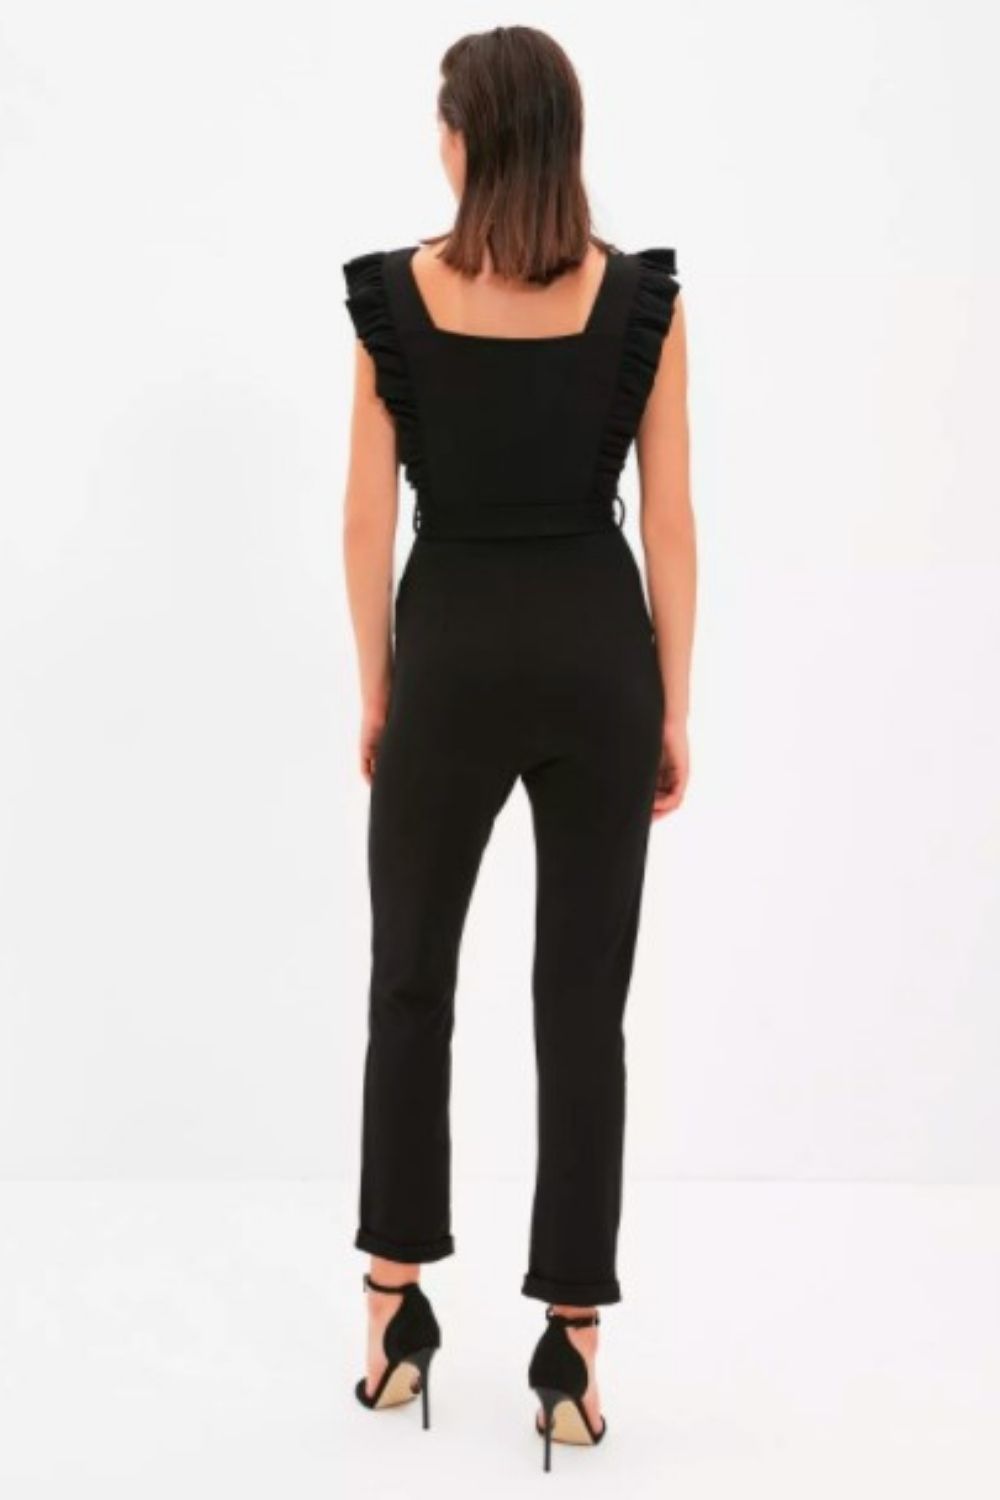 Call Me May Be Black Jumpsuit